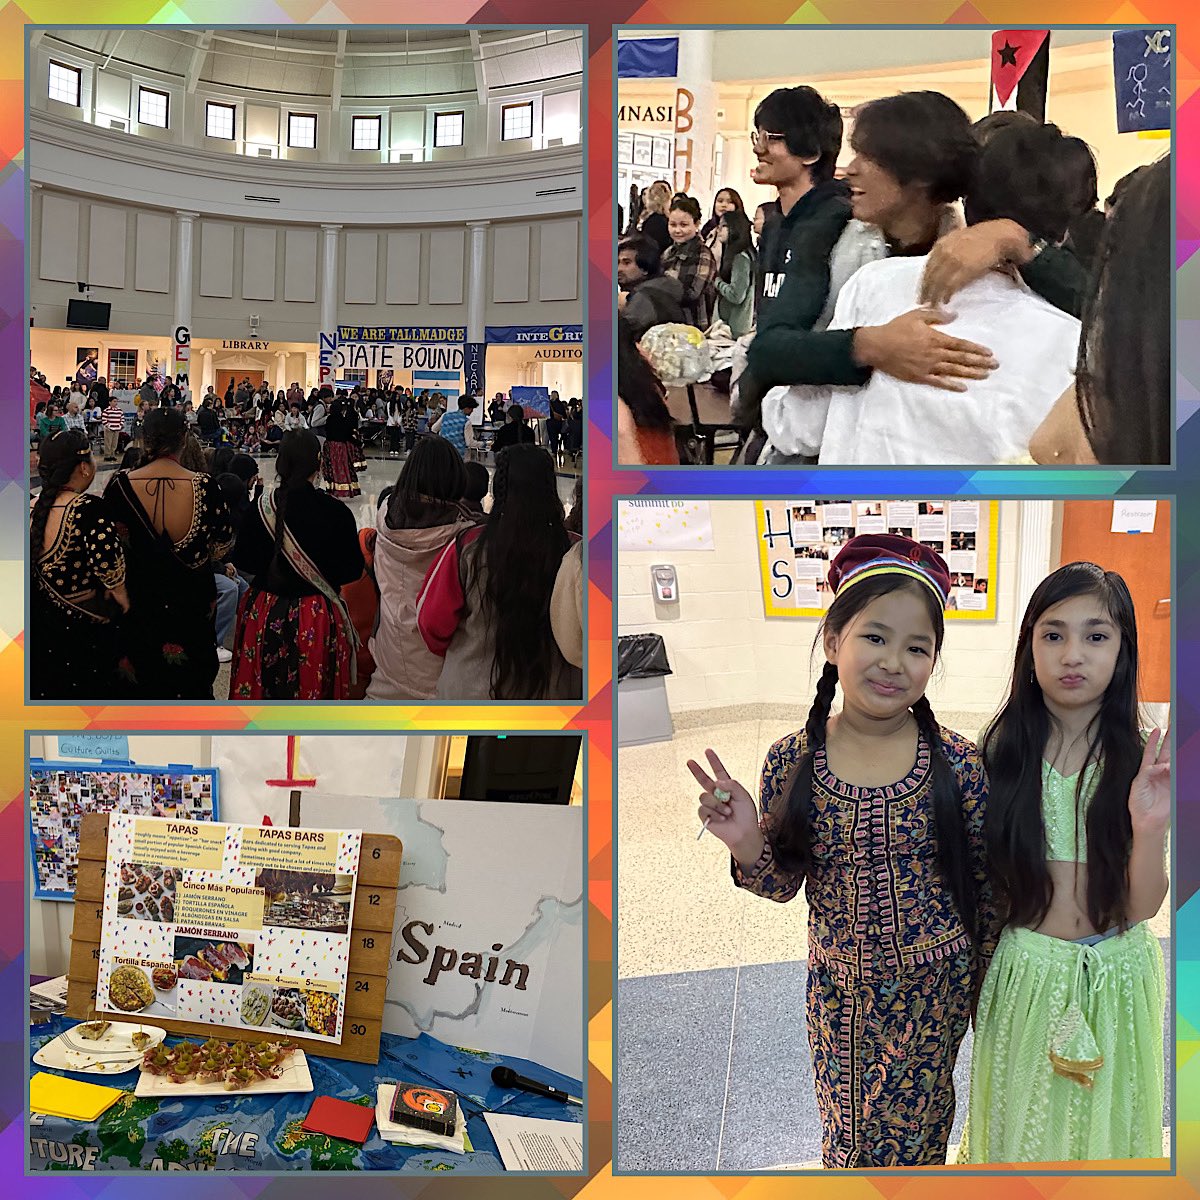 A small glimpse at an absolutely spectacular student showcase! #TCSInternationalNight 💞#StudentsShine #CommunityConnections
@tcstweets1 @tcs_swood @tcs_curriculum